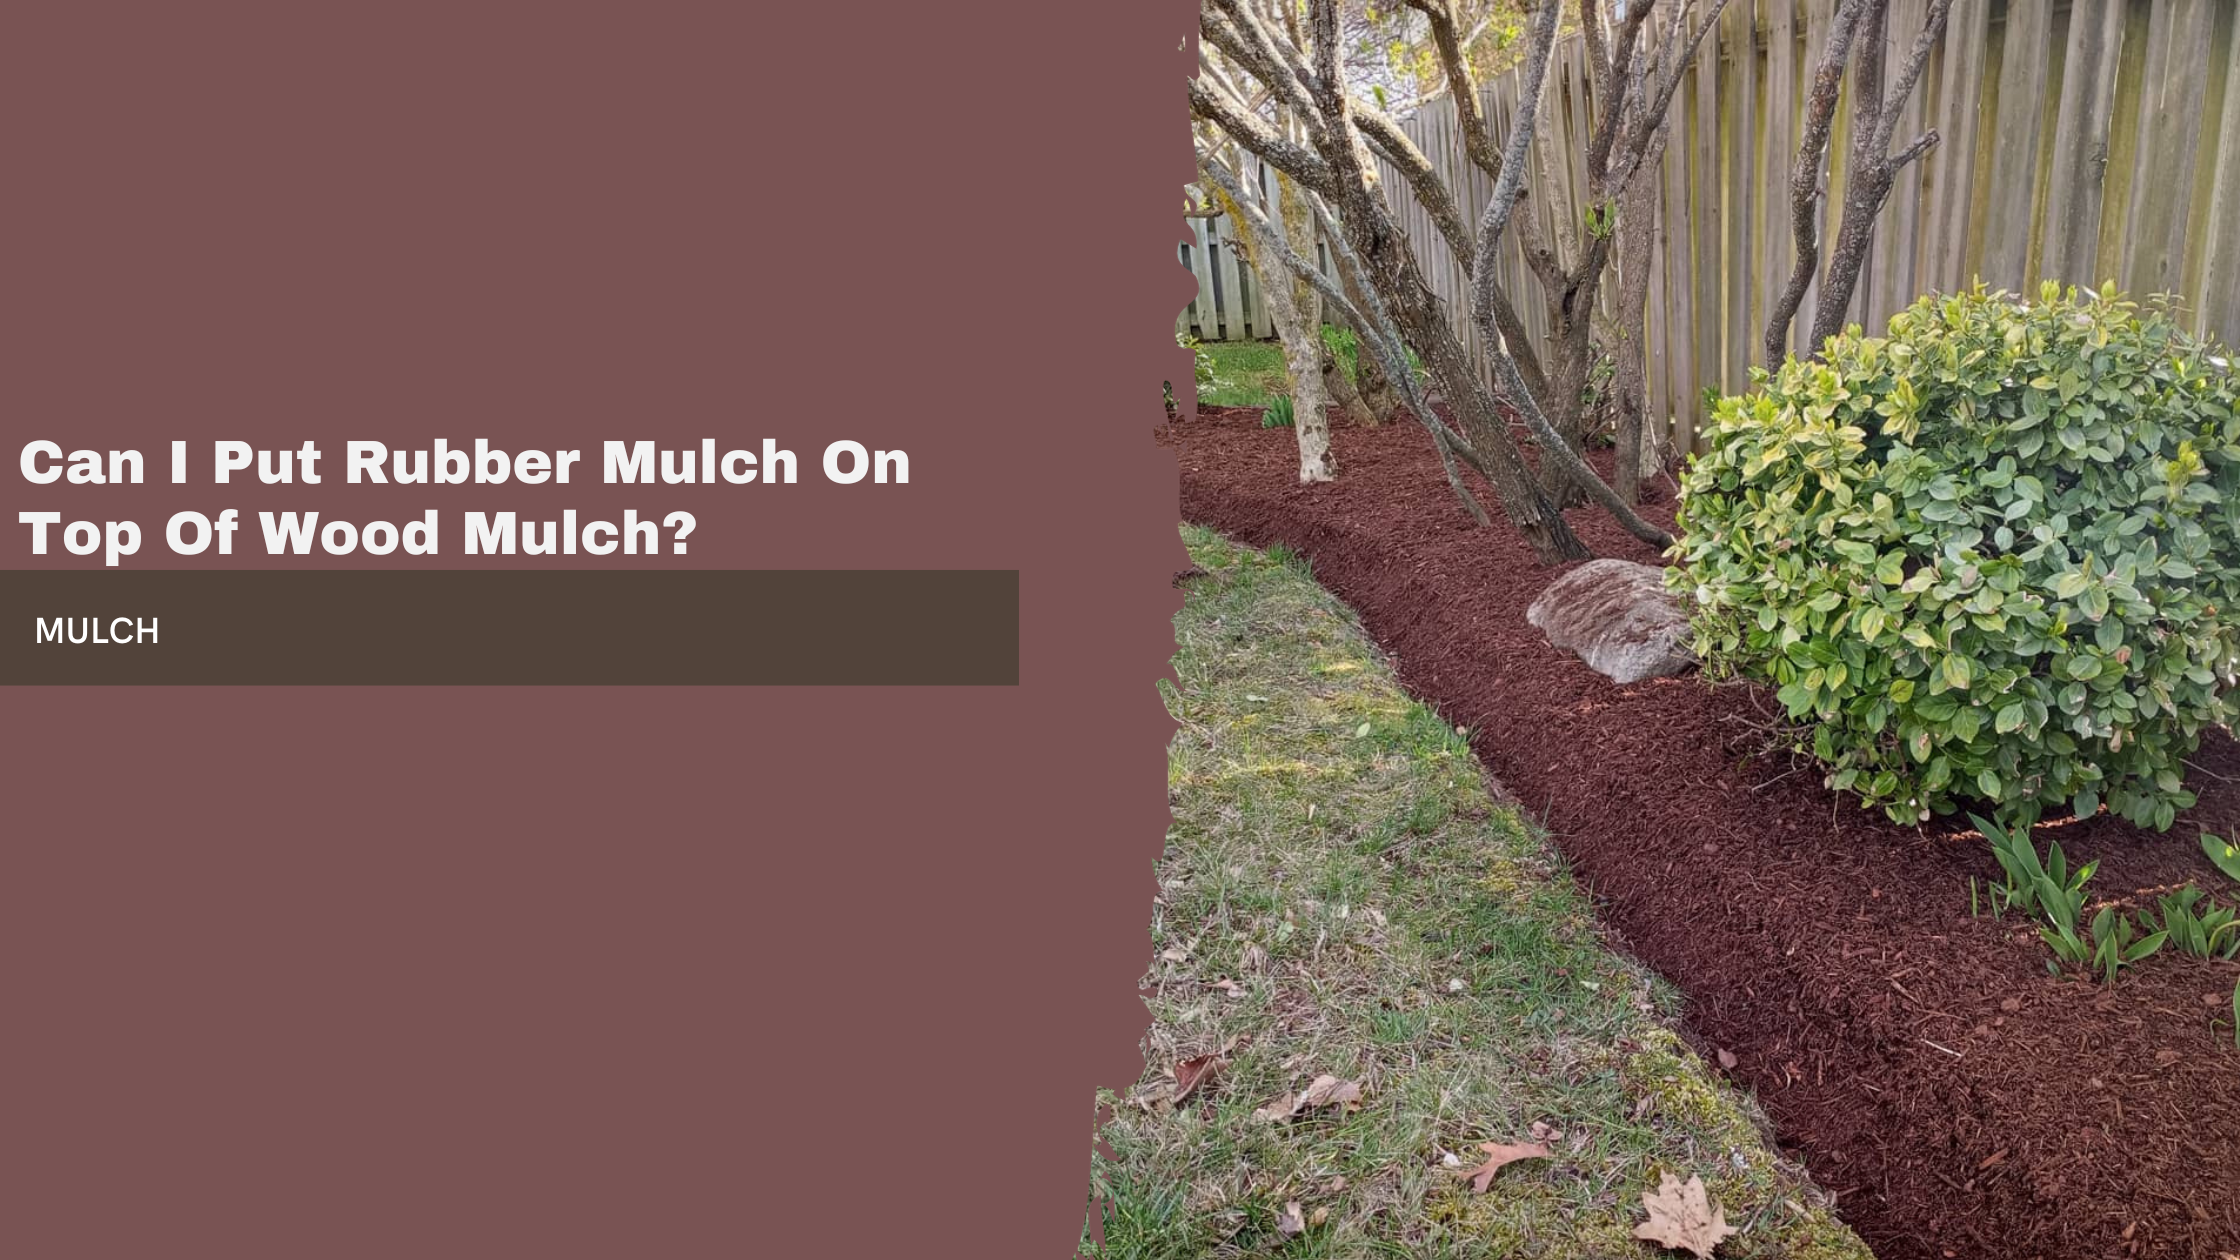 Can I Put Rubber Mulch On Top Of Wood Mulch?